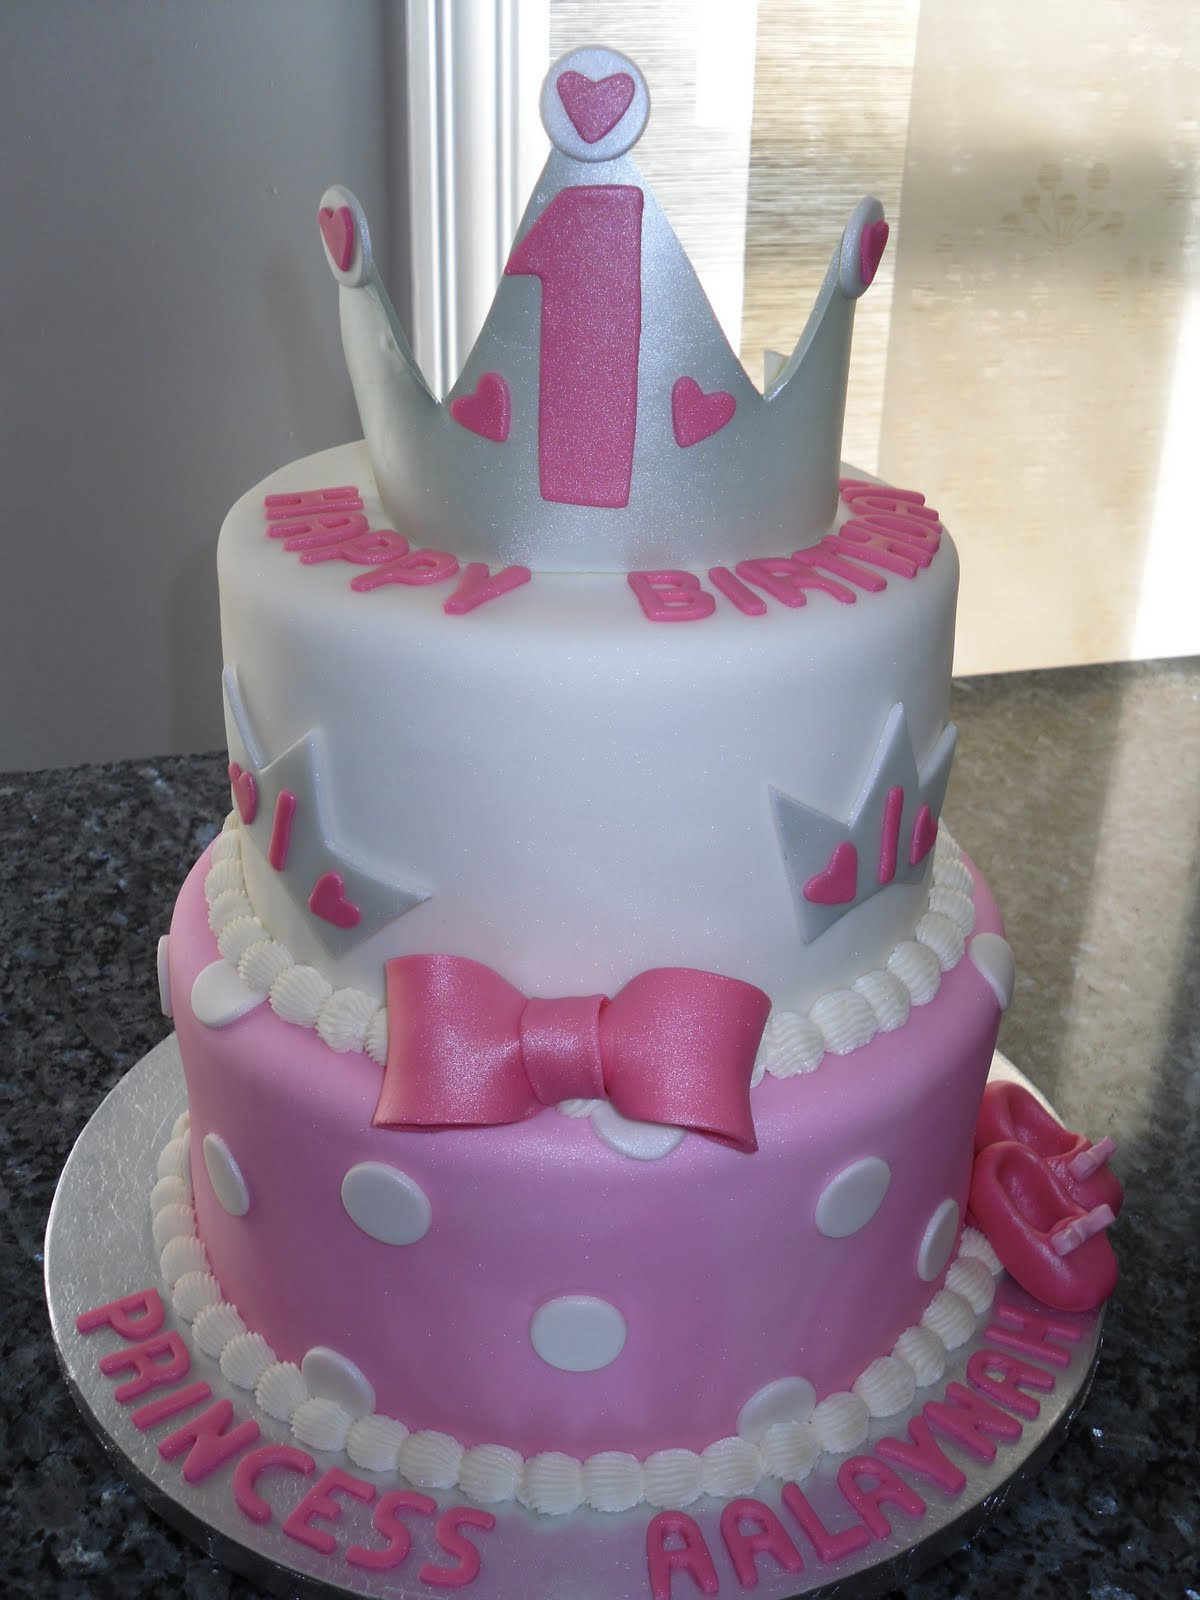 One Year Old Birthday Cake
 Carat Cakes Two Very Special e Year Old Birthdays